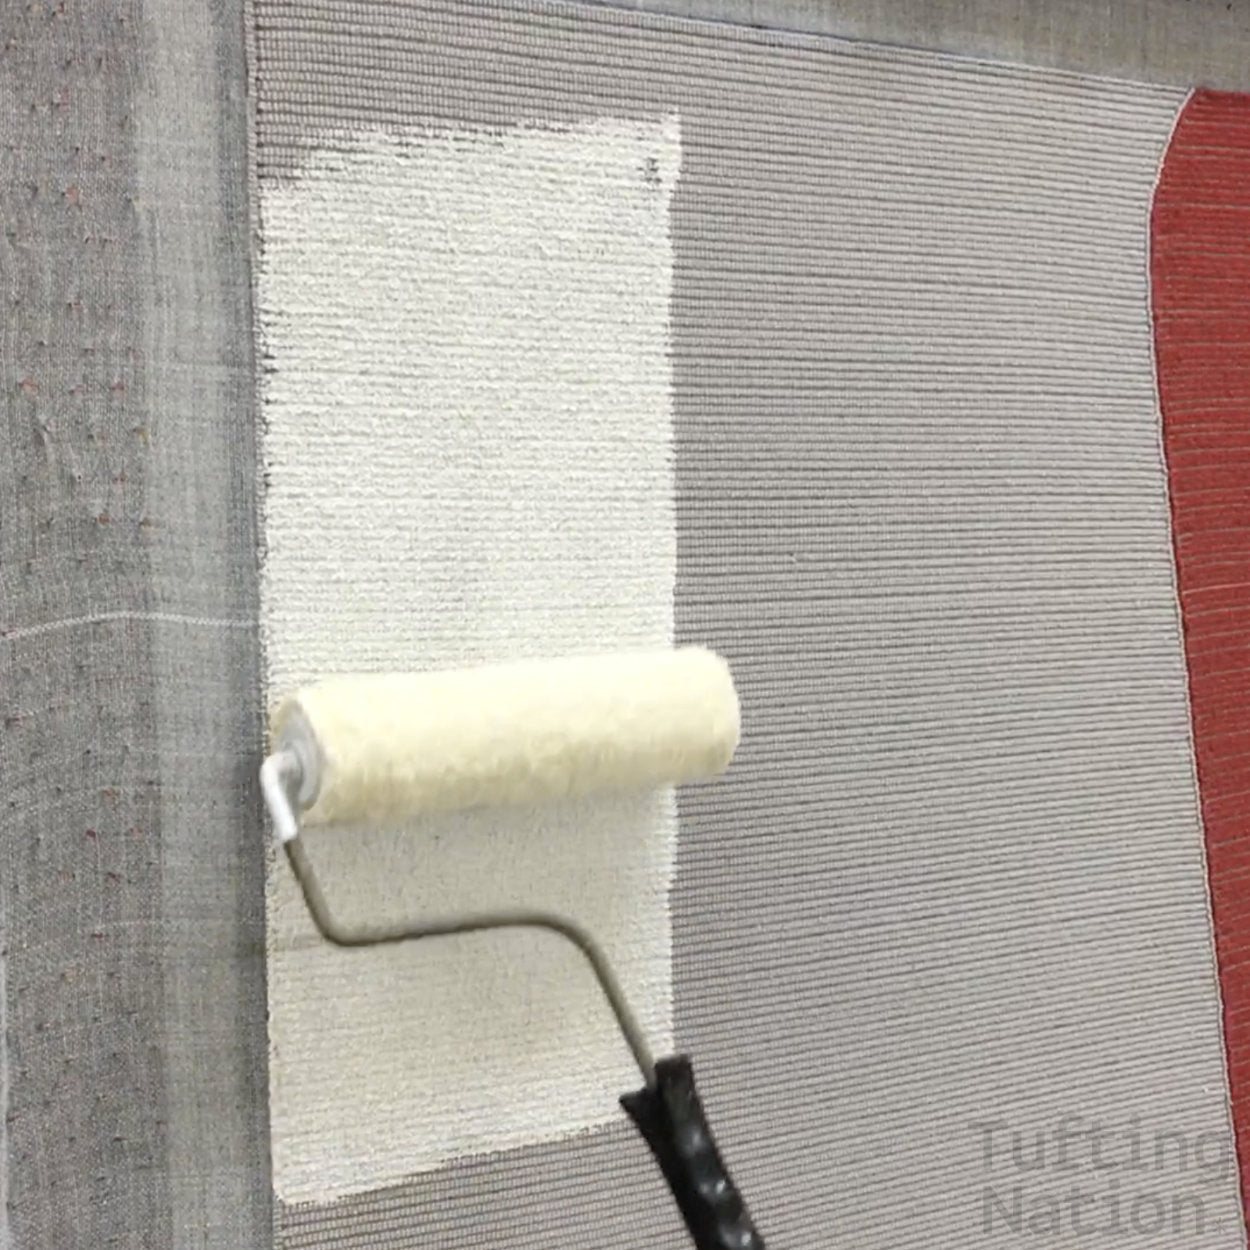 How to apply glue and backing to the tufted rug 